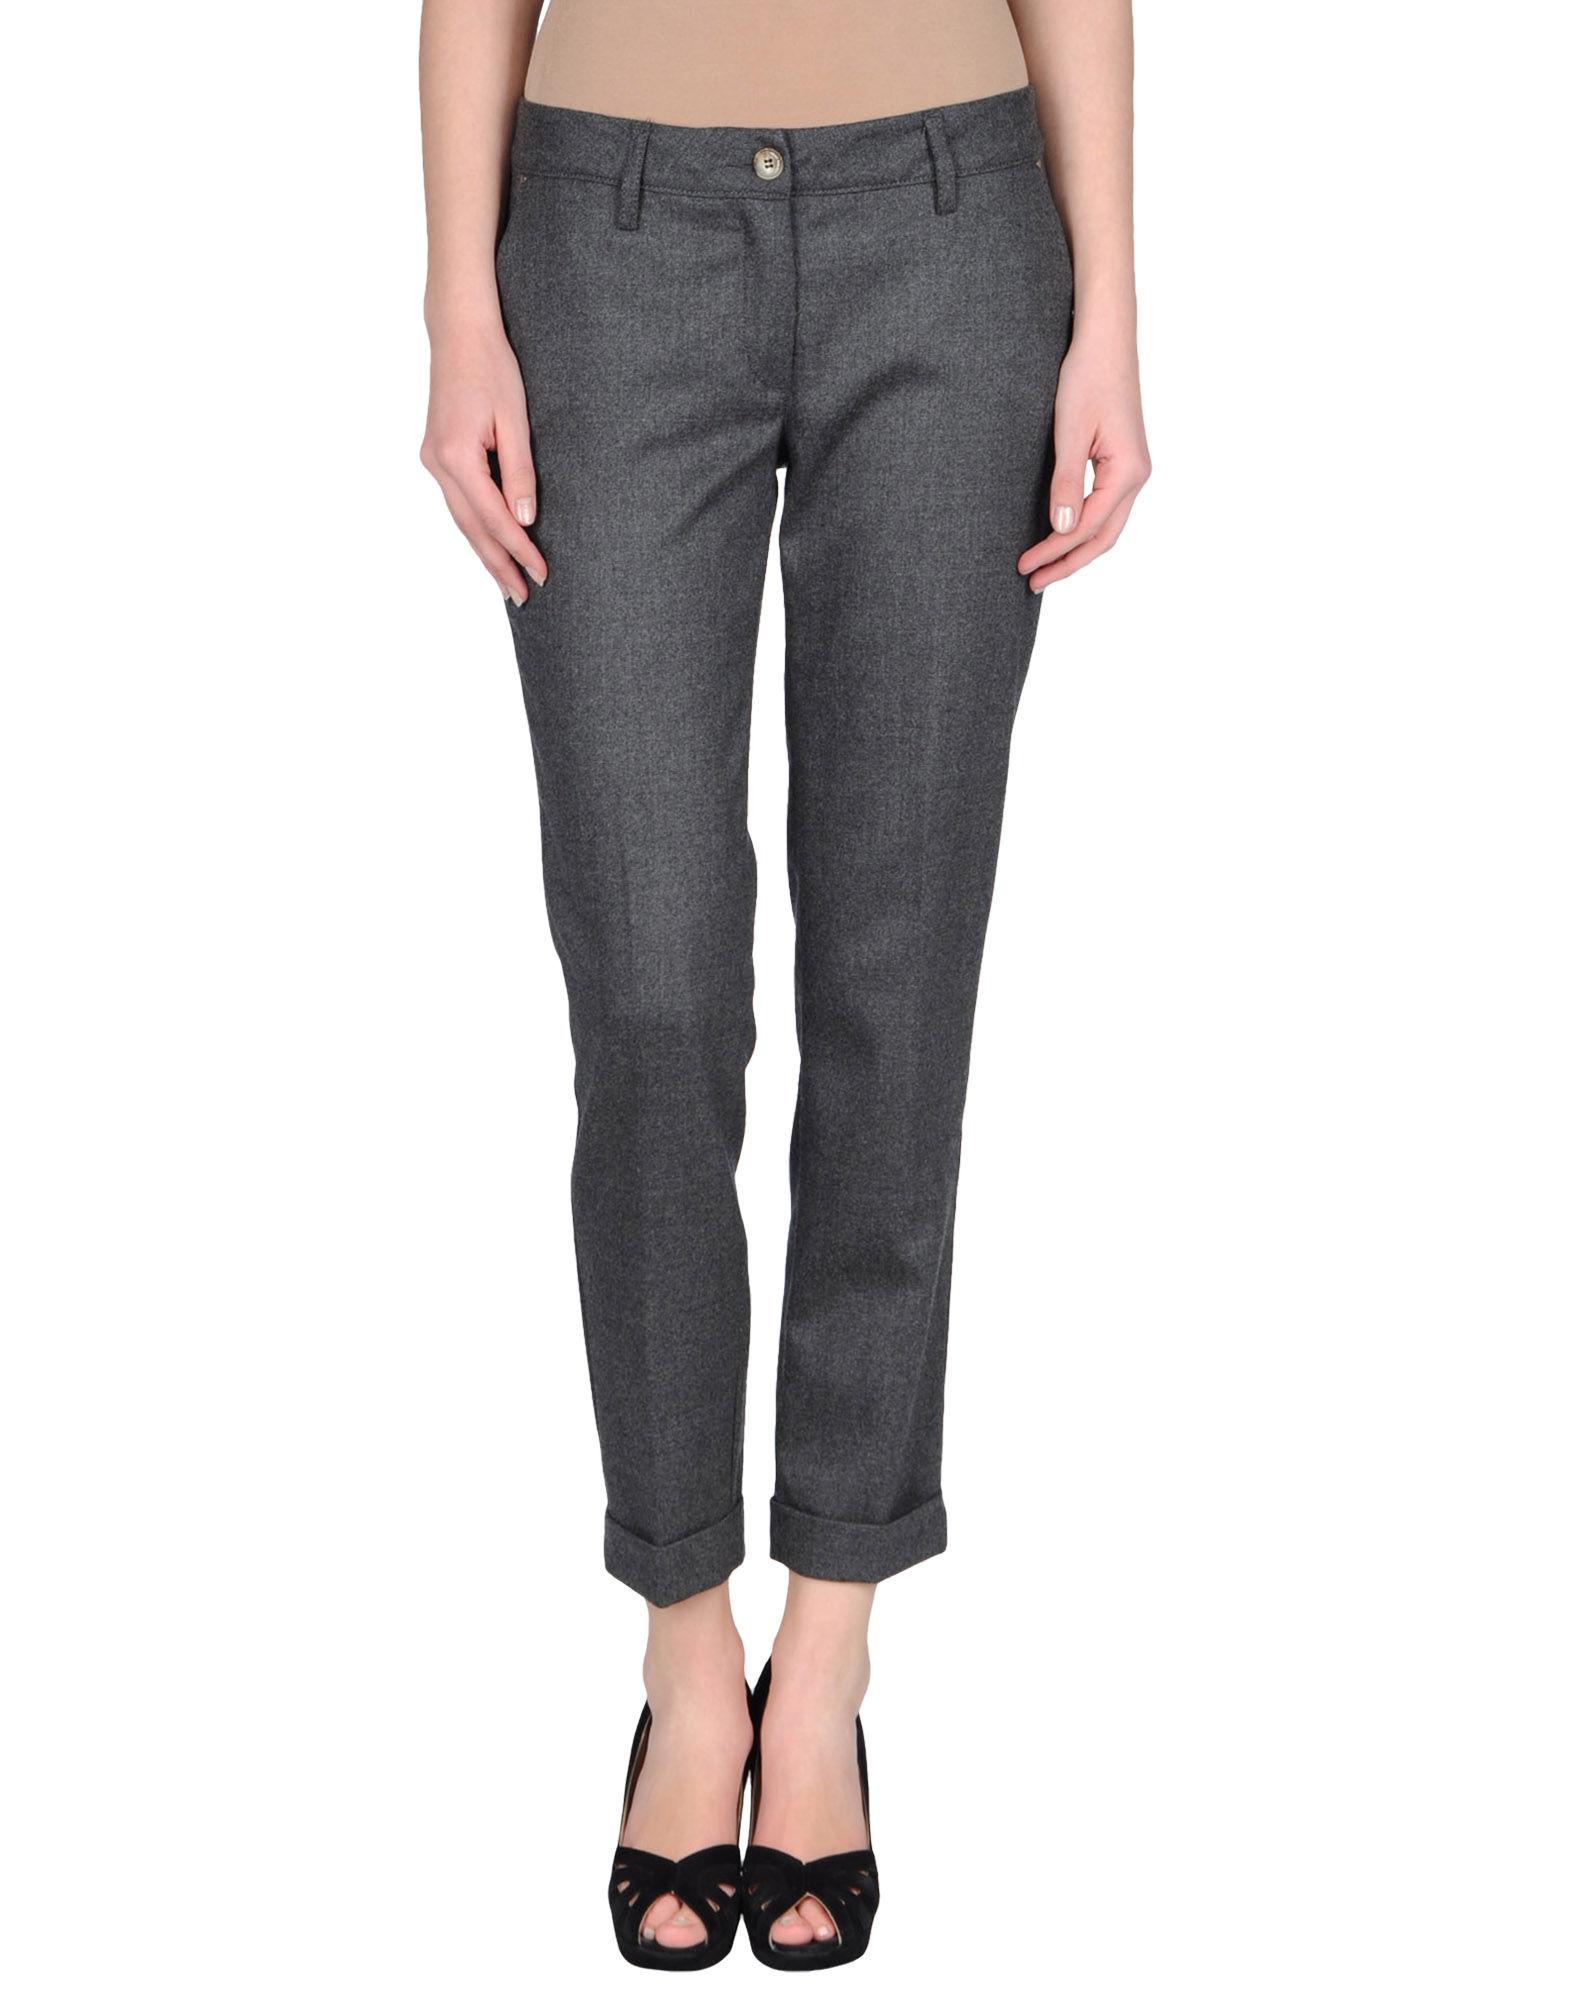 Foto Heavy Project Pantalones Mujer Gris